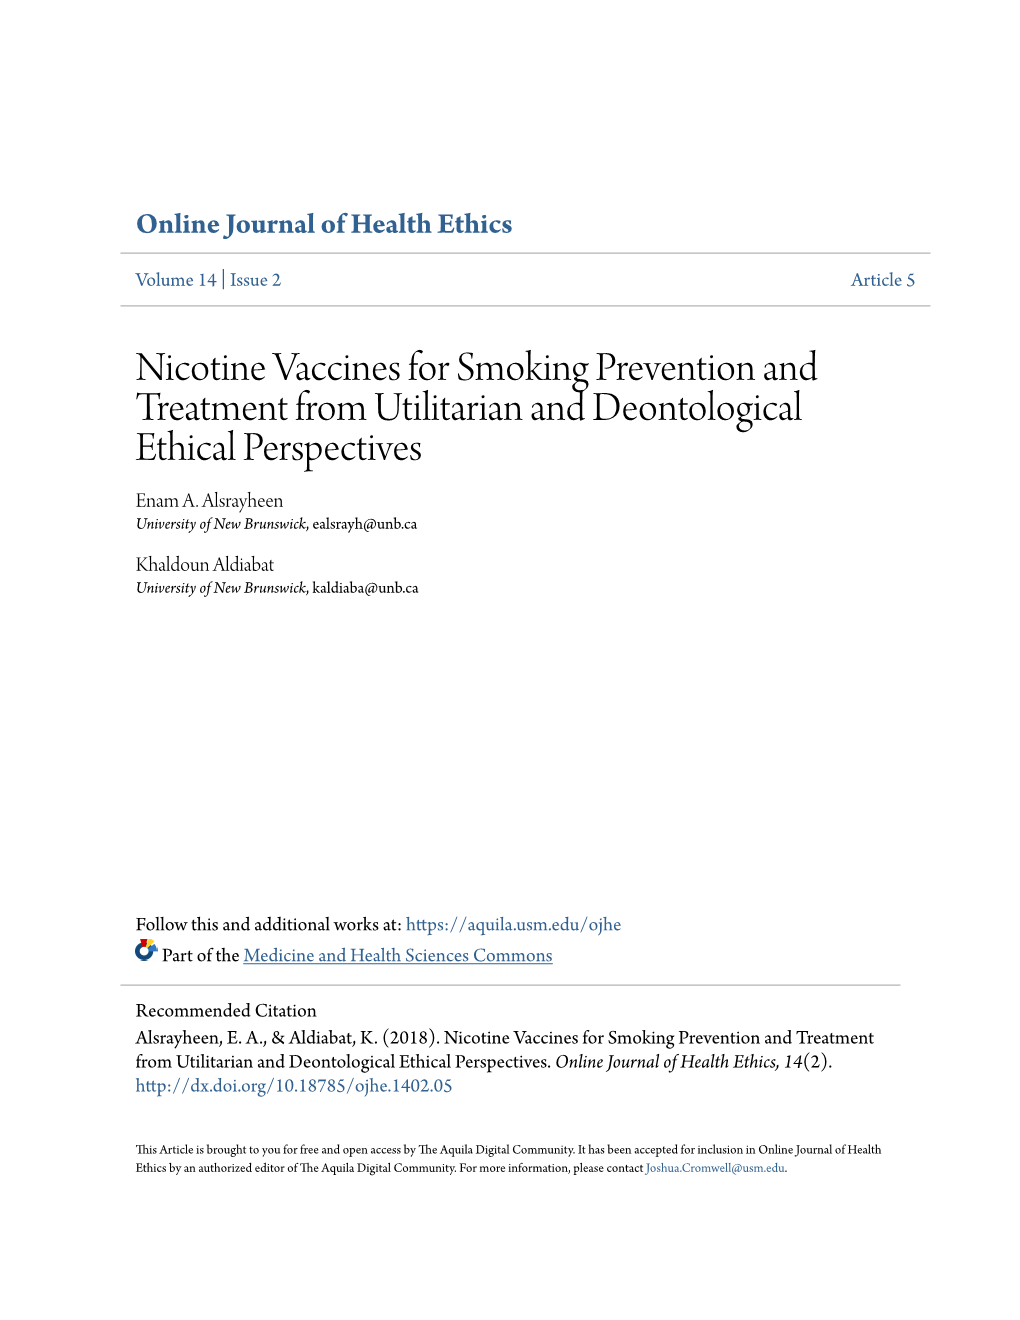 Nicotine Vaccines for Smoking Prevention and Treatment from Utilitarian and Deontological Ethical Perspectives Enam A